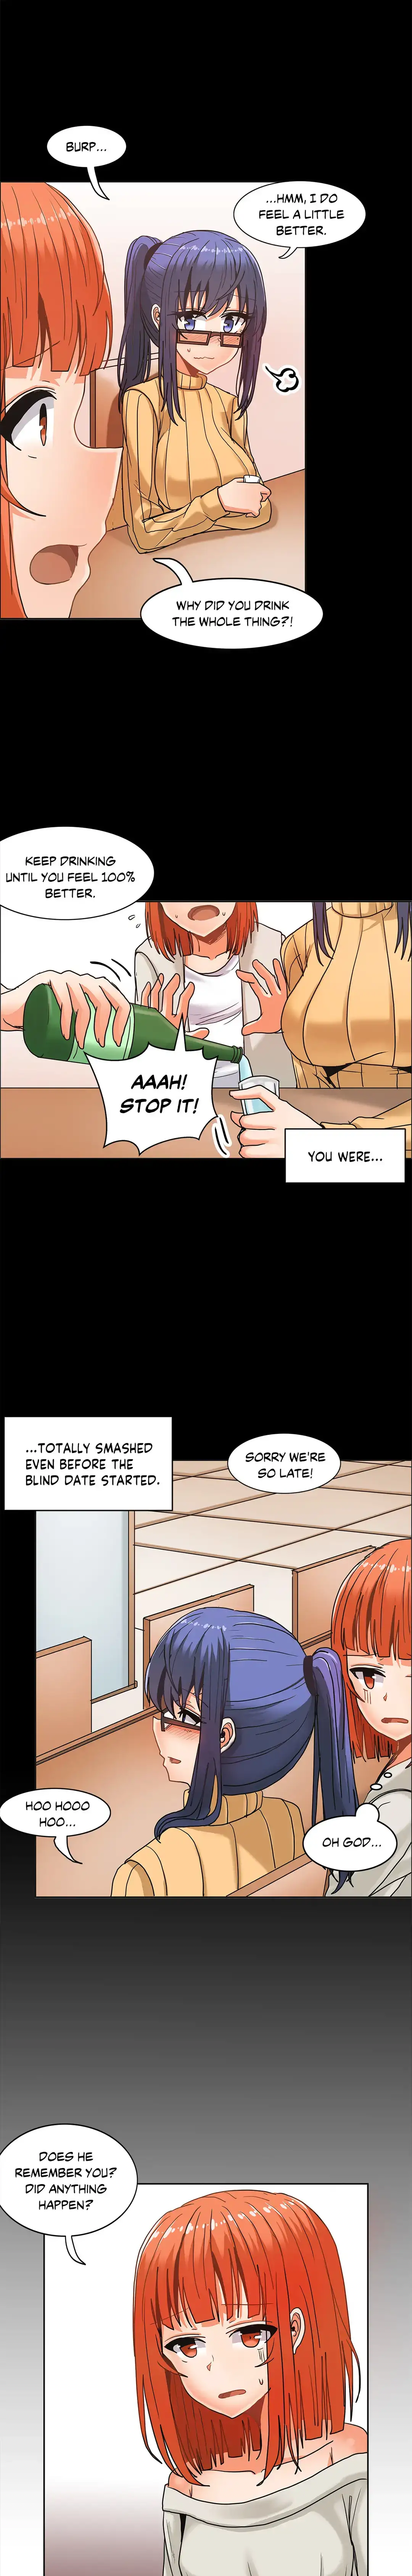 The Girl That Wet the Wall - Chapter 20 Page 7